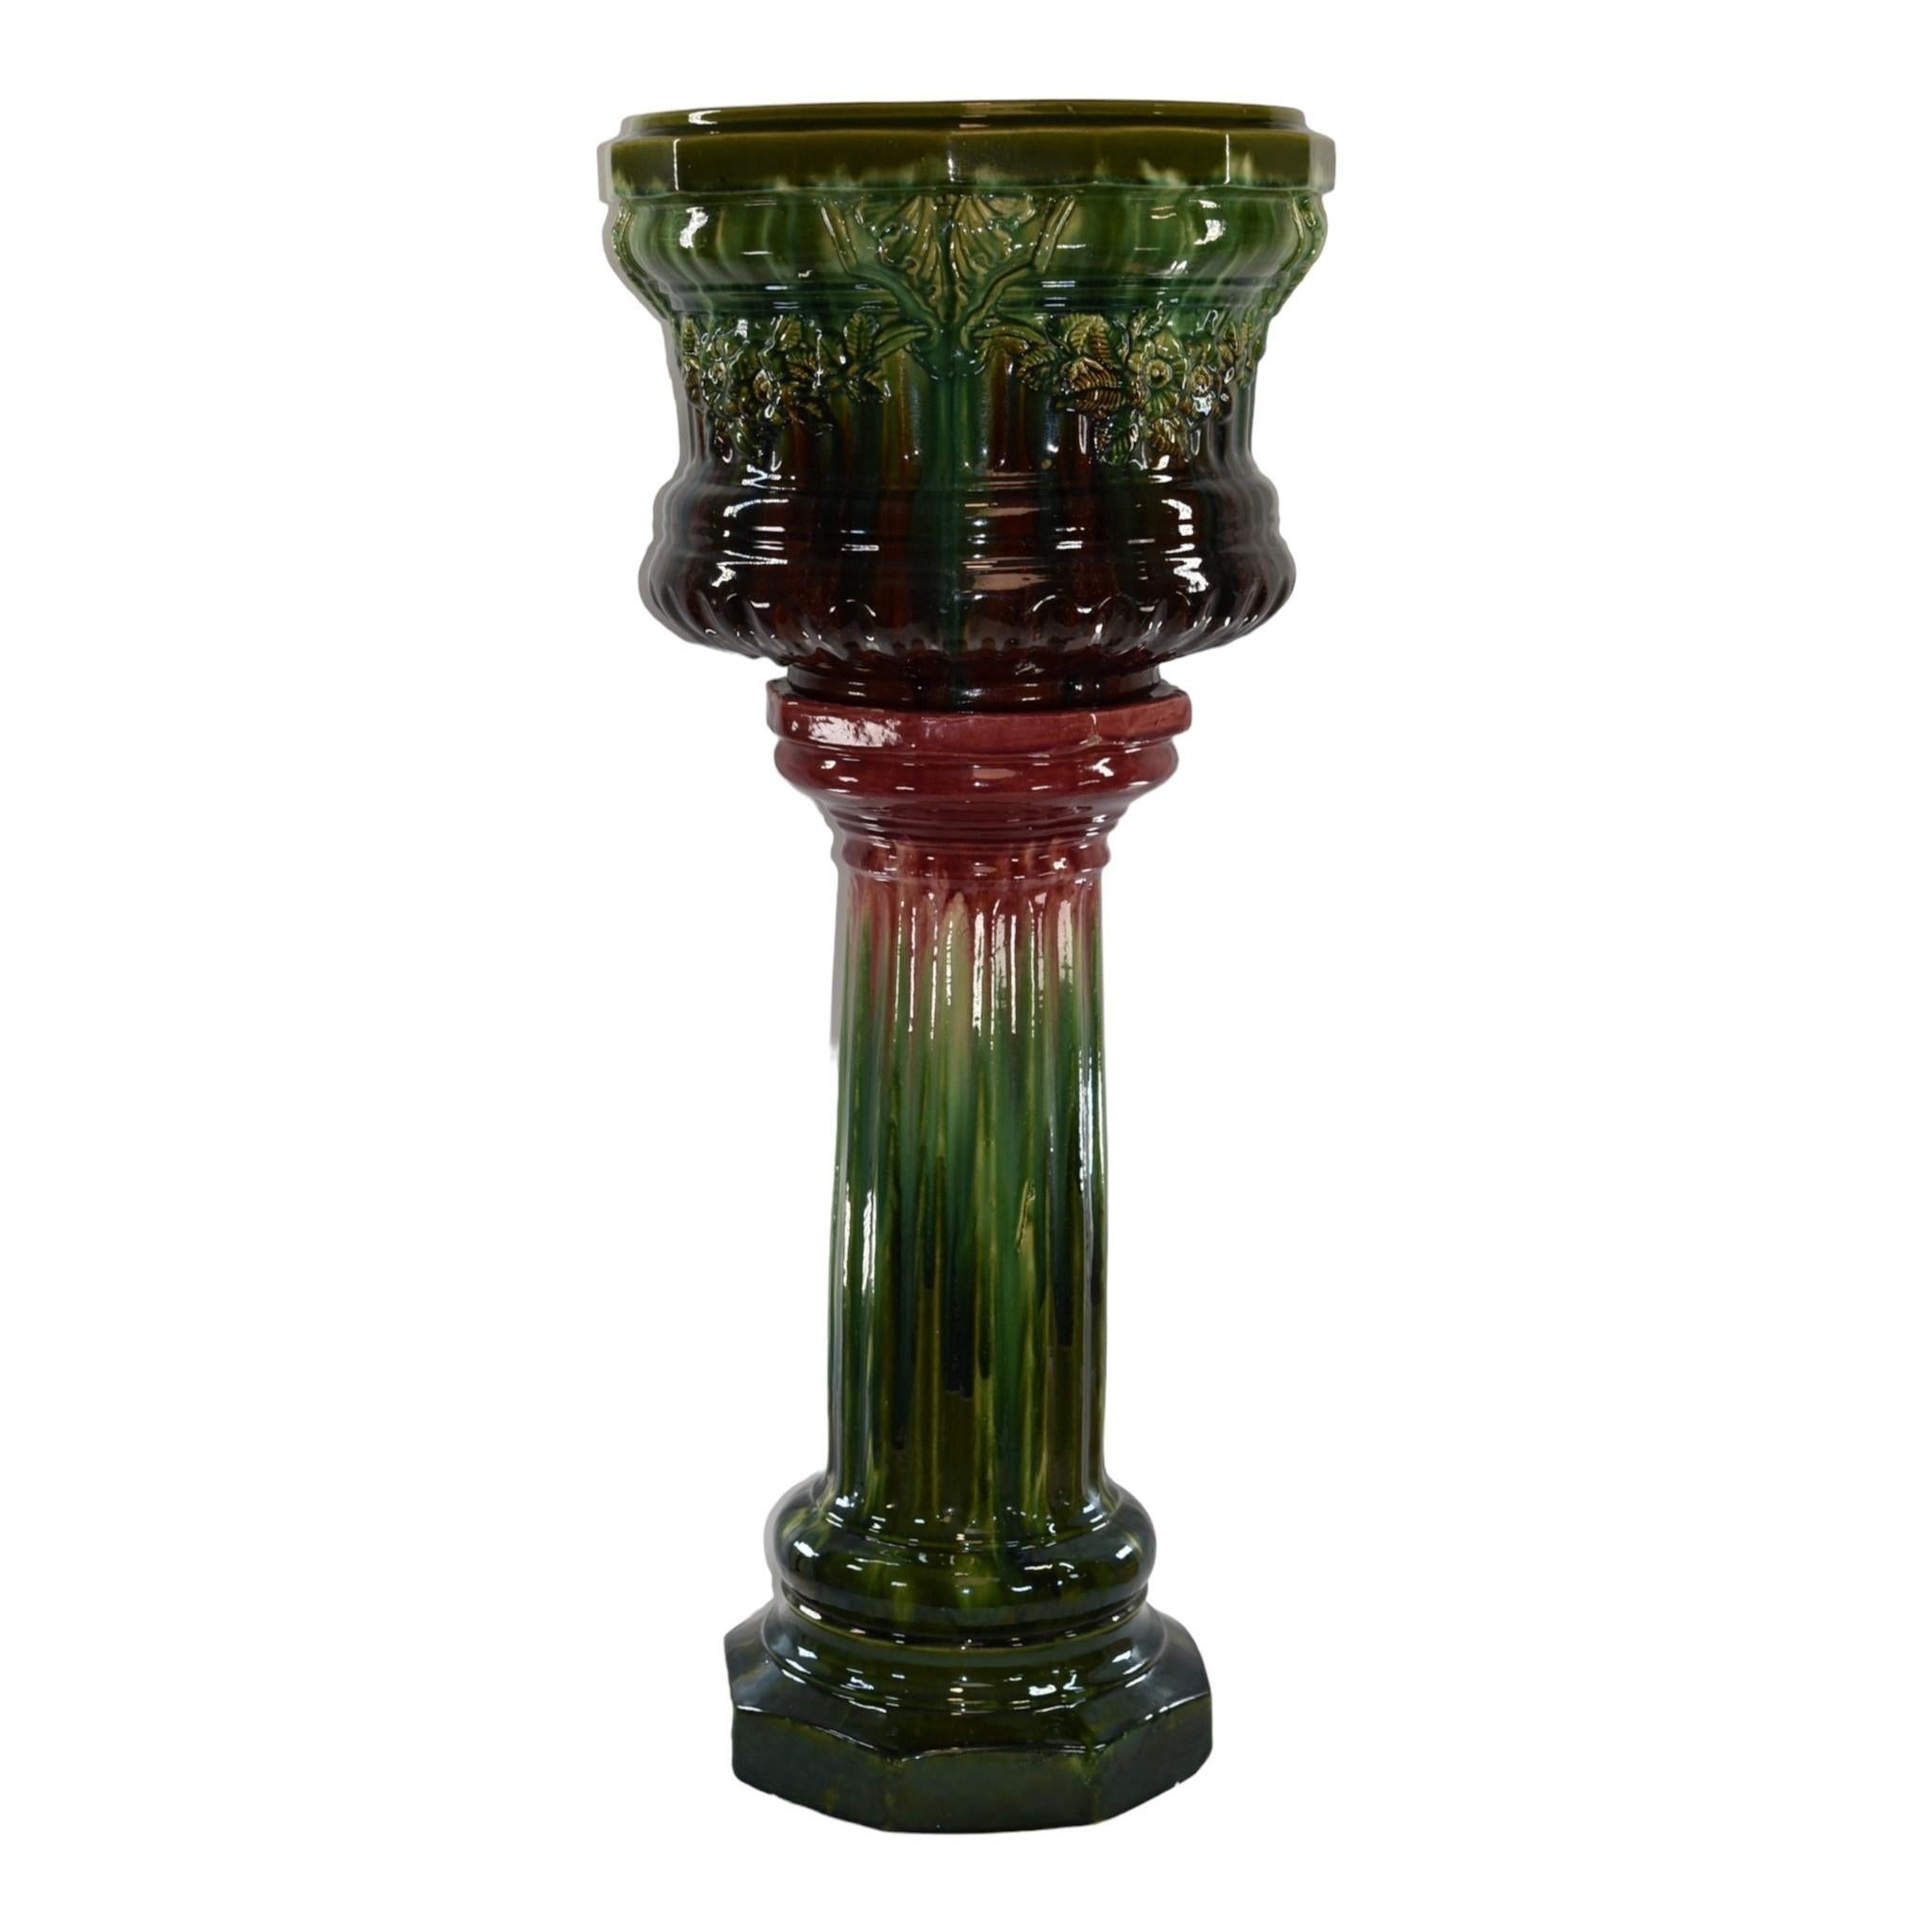 Brush McCoy Athenian 1928 Art Pottery Majolica Blended Jardiniere Pedestal 2540B
Massive and rarely seen Majolica blended glaze Athenian jardiniere and pedestal with great design, color and glaze.
Shows well with a pinky nail sized chip to rim and